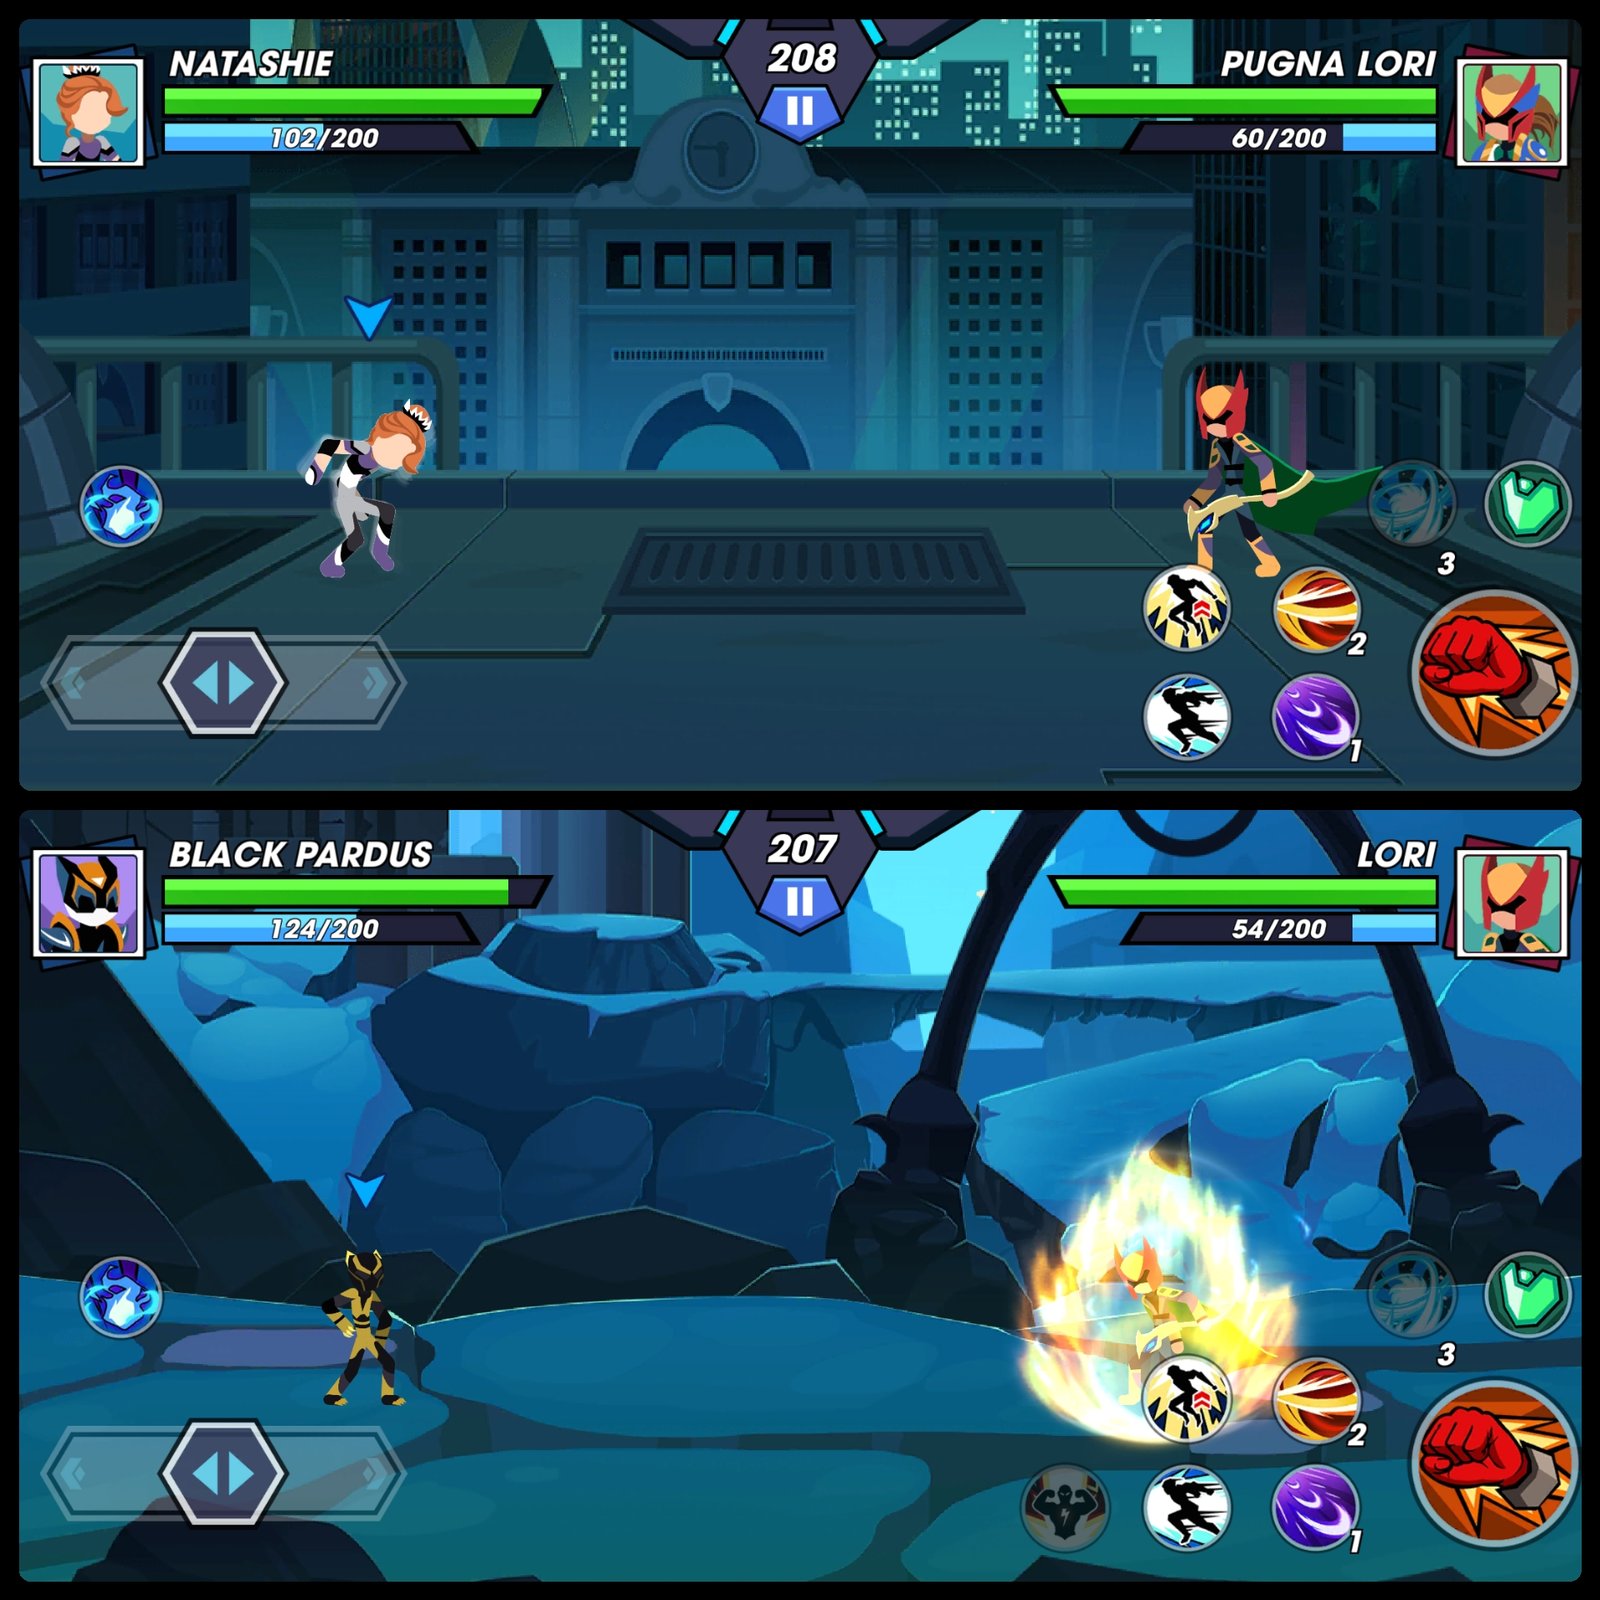 Stickman Fighter Infinity - Super Action Heroes v1.1.8 MOD APK -   - Android & iOS MODs, Mobile Games & Apps